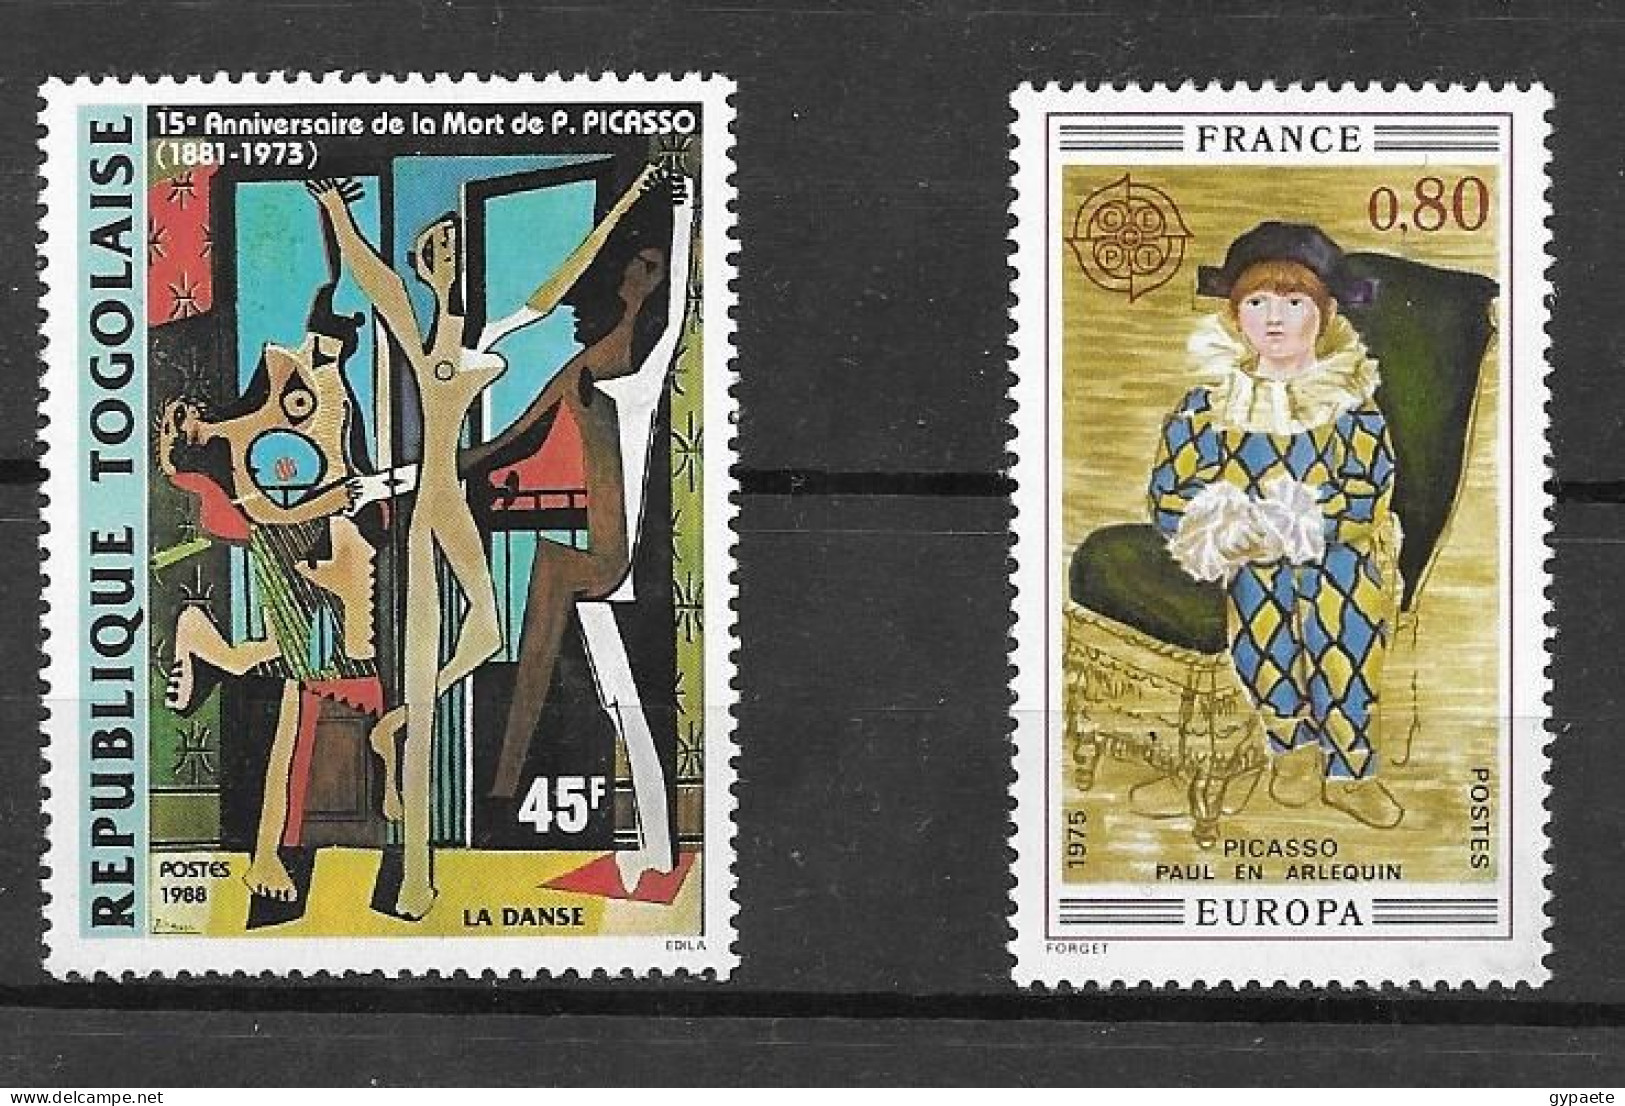 Peinture - Picasso - 2 Timbres / Paintings - Picasso - 2 Stamps - MNH - Picasso